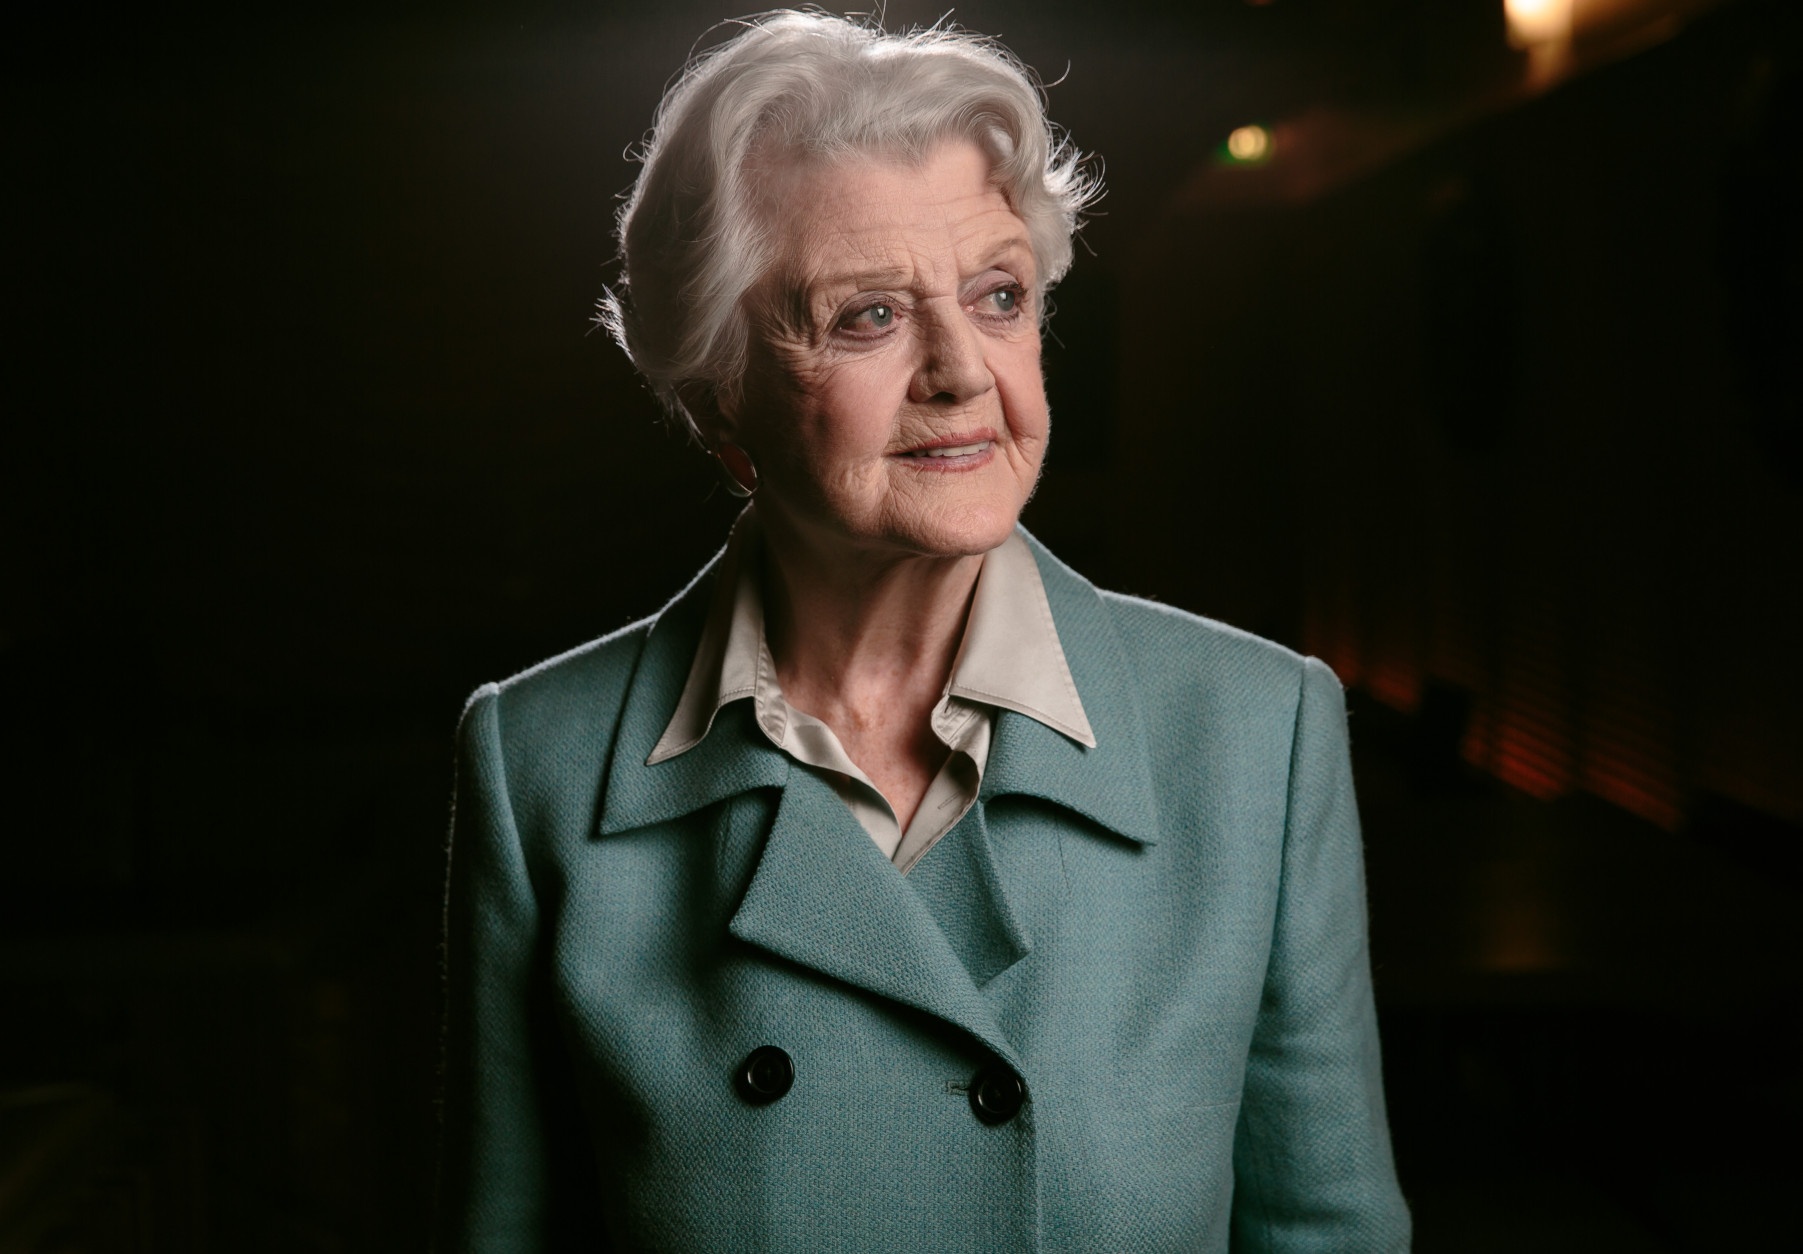 In this Tuesday, Dec.16, 2014 photo, Angela Lansbury poses for a portrait during press day for "Blithe Spirit" at the Ahmanson Theatre in downtown Los Angeles. Lansbury is appearing in the production of Noel Cowards comedy Blithe Spirit from Dec. 9, 2014, through Jan. 18, 2015, in Los Angeles.  (Photo by Casey Curry/Invision/AP)